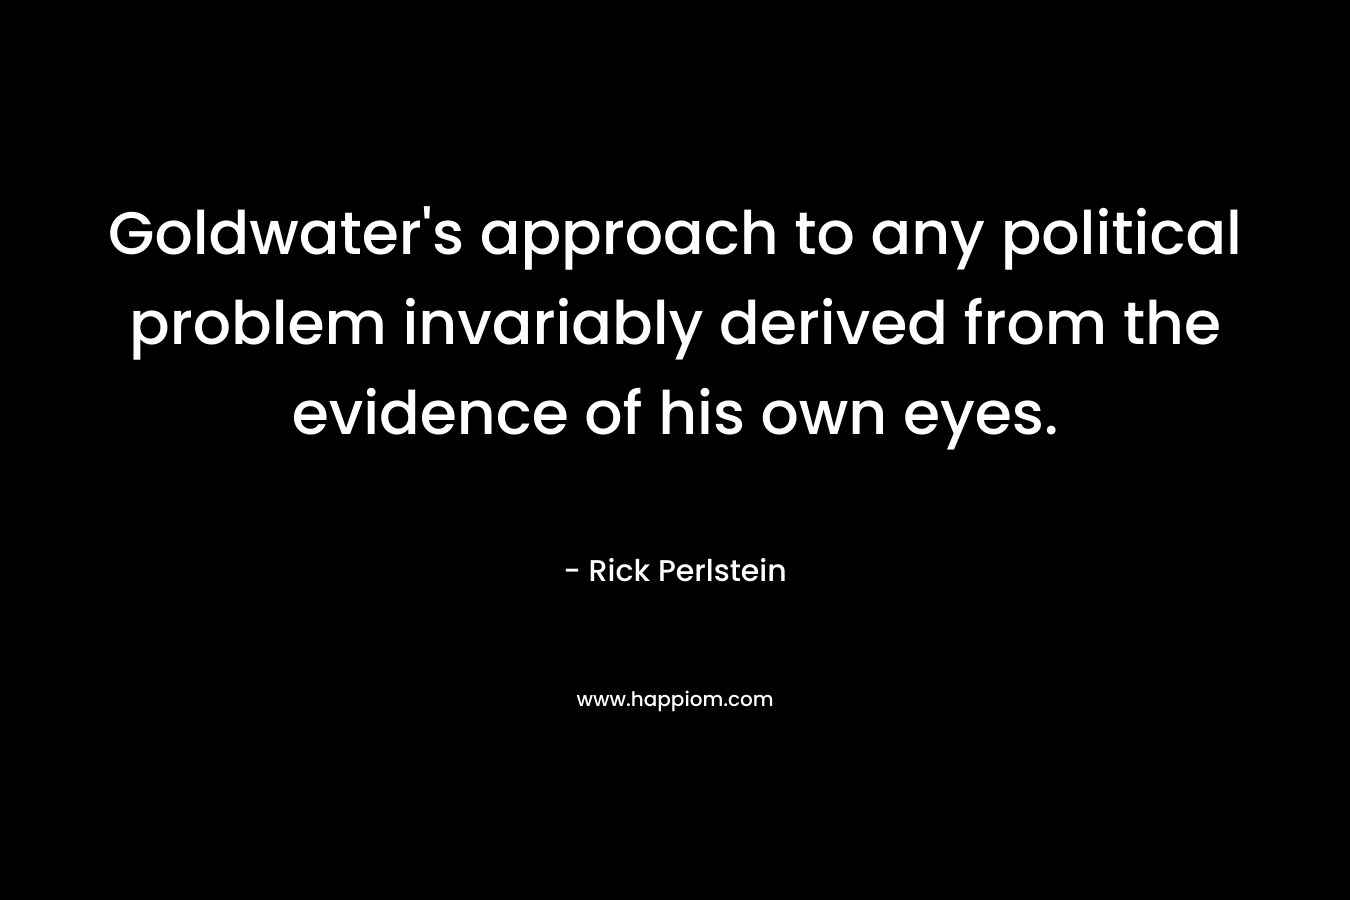 Goldwater’s approach to any political problem invariably derived from the evidence of his own eyes. – Rick Perlstein